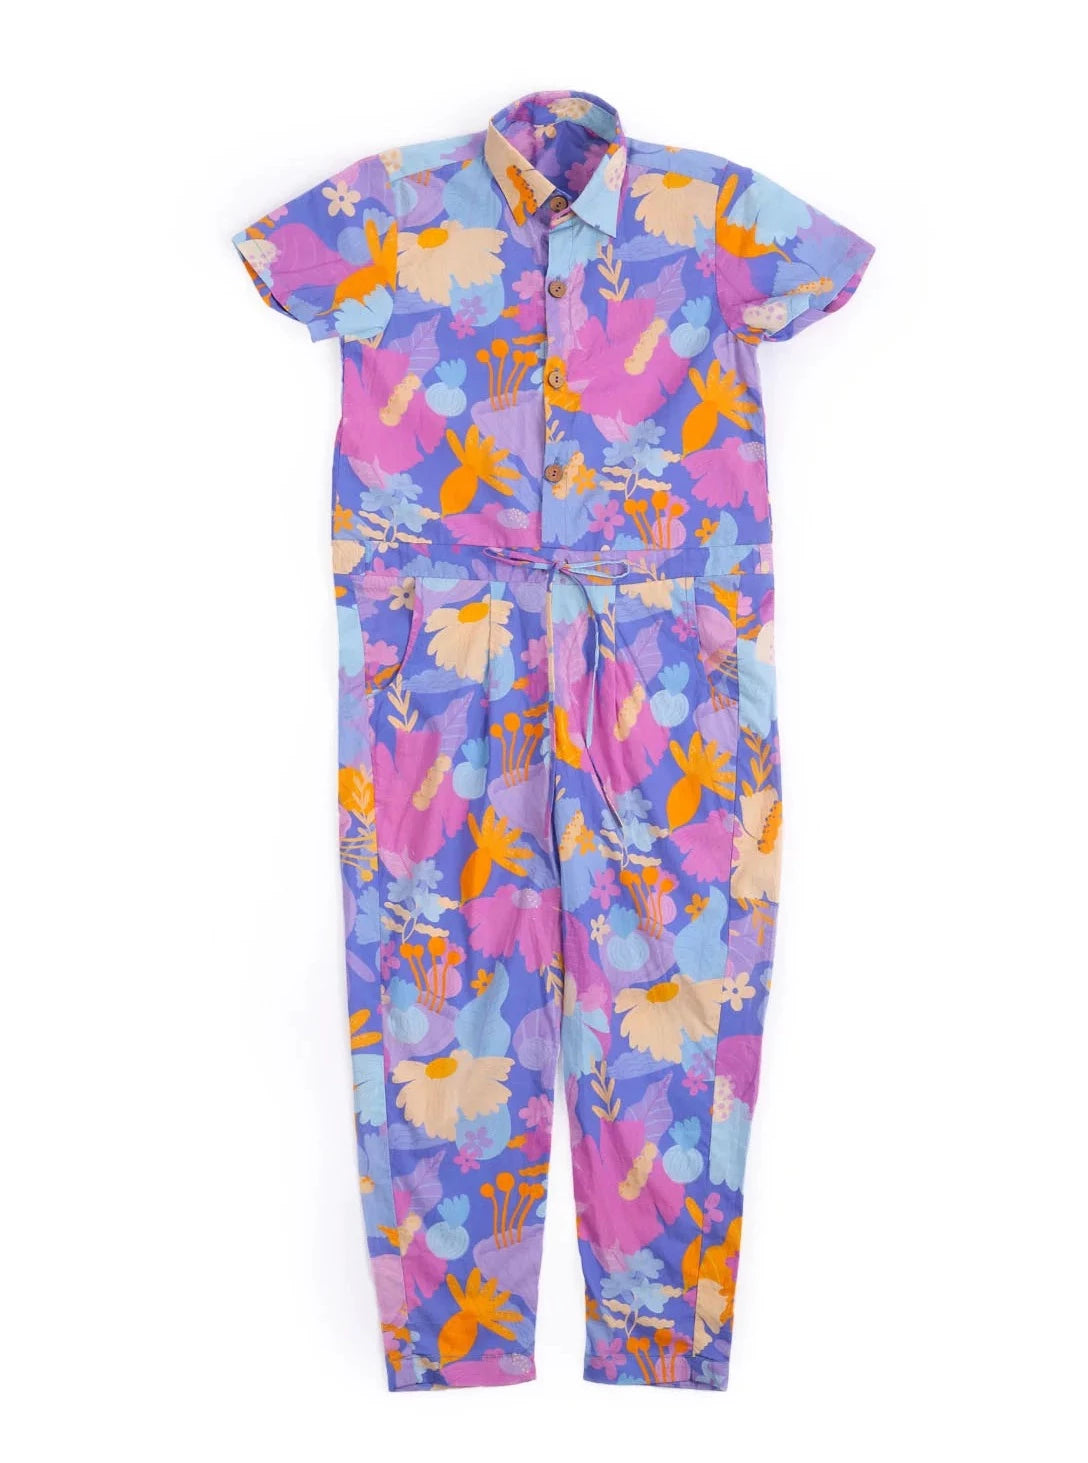 MIKO LOLO Daffy Unisex Jumpsuit in Organic Cotton | kids Fashion | The Green Collective SG